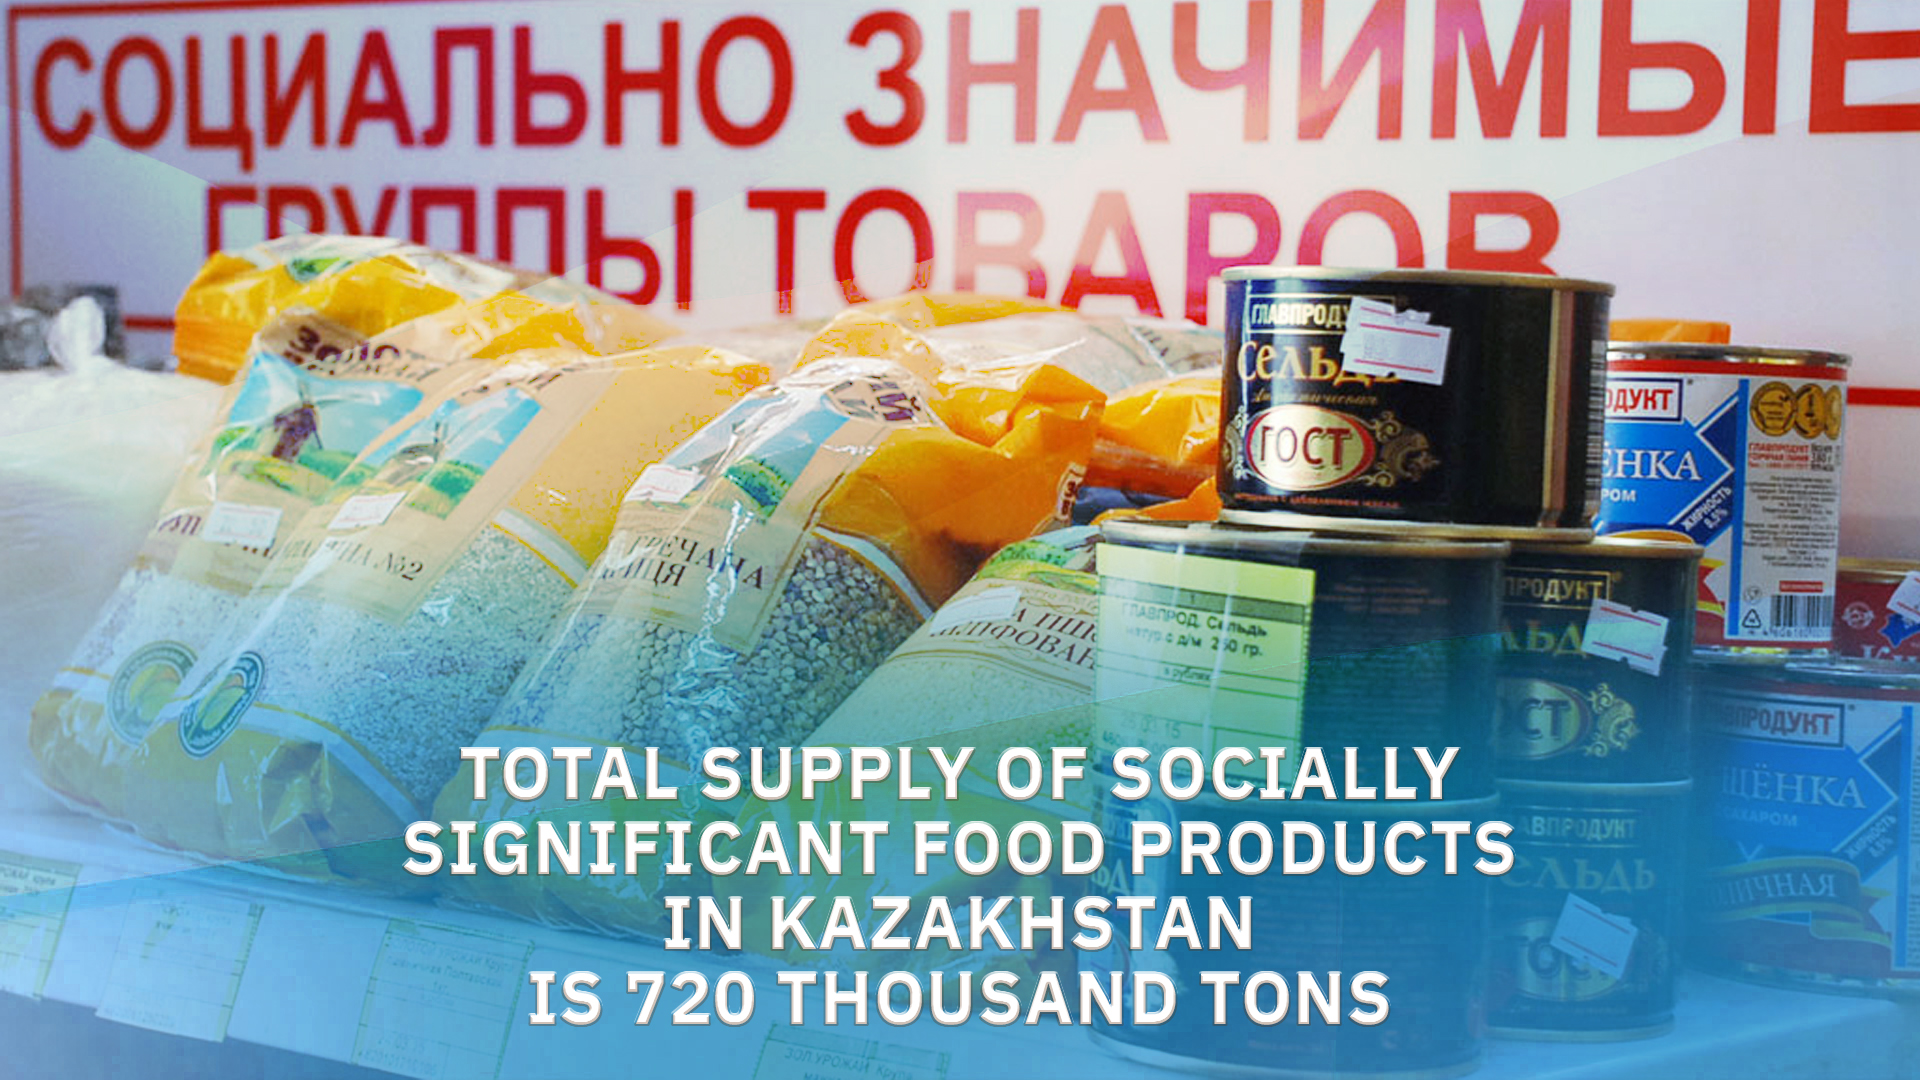 Total supply of socially significant food products in Kazakhstan is 720 thousand tons